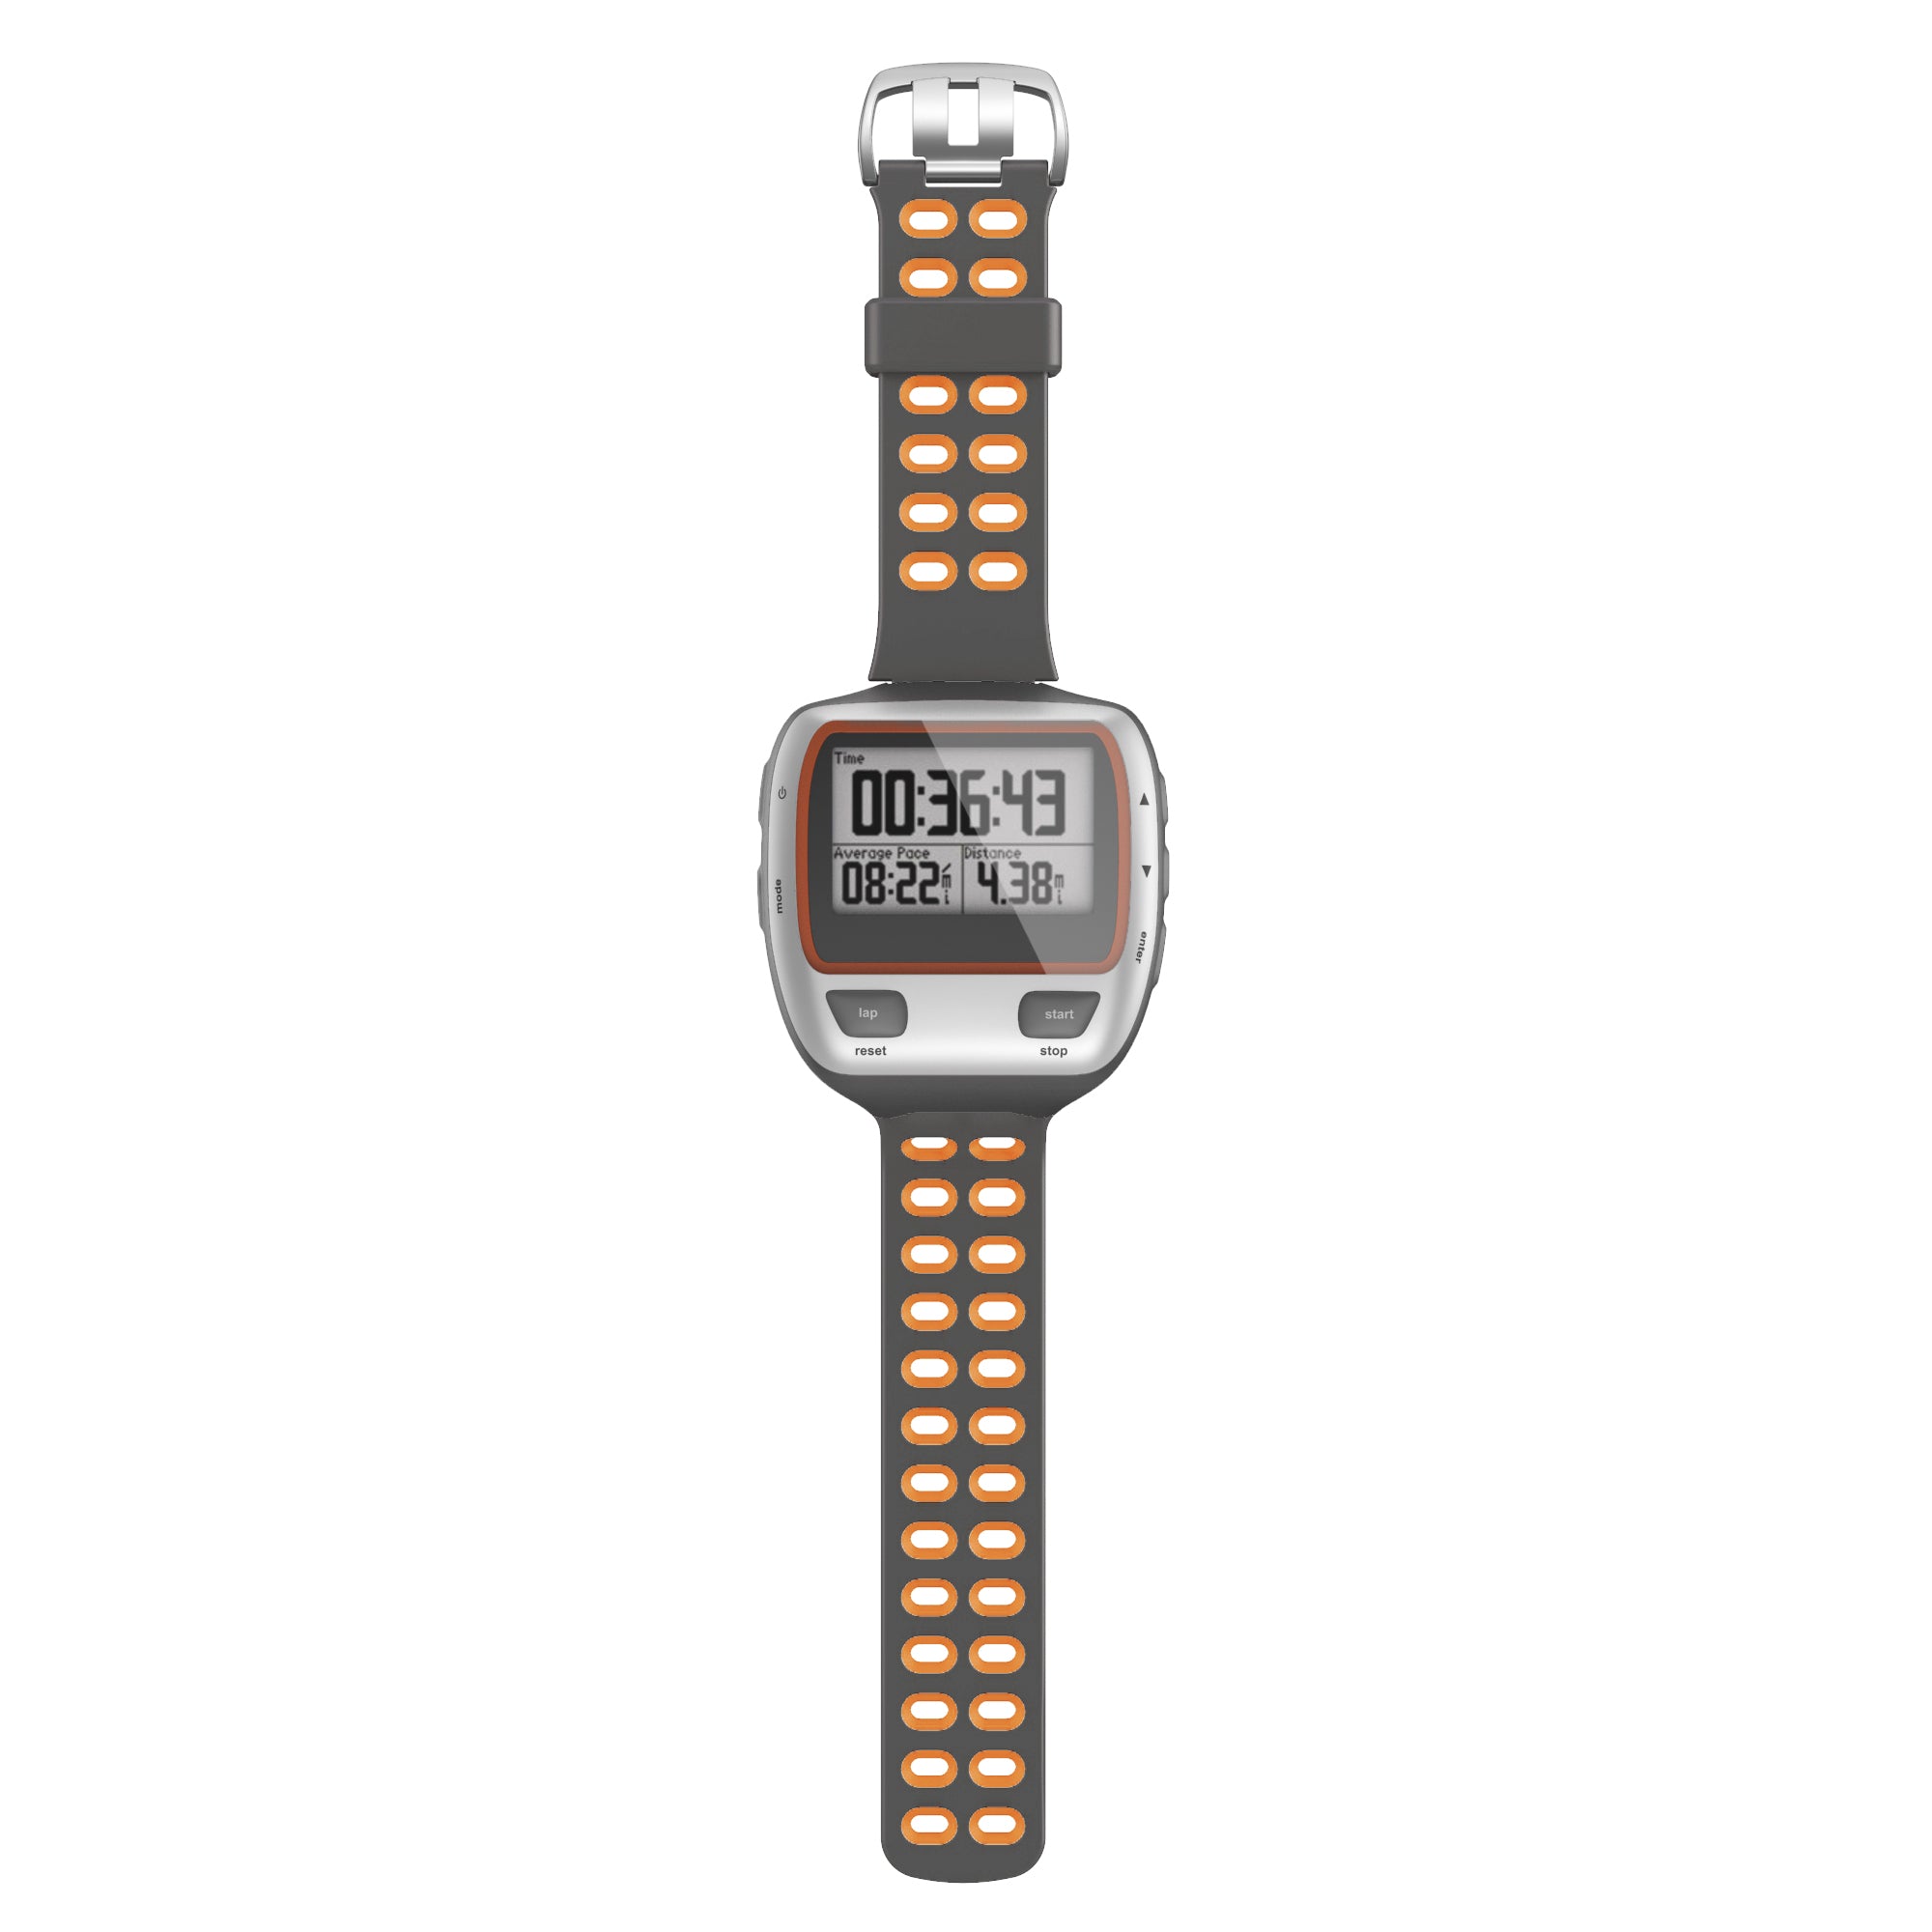 Double Color Silicone Watchband Strap Belt Replacement for Garmin Forerunner 310XT Smart Watch - Grey / Orange